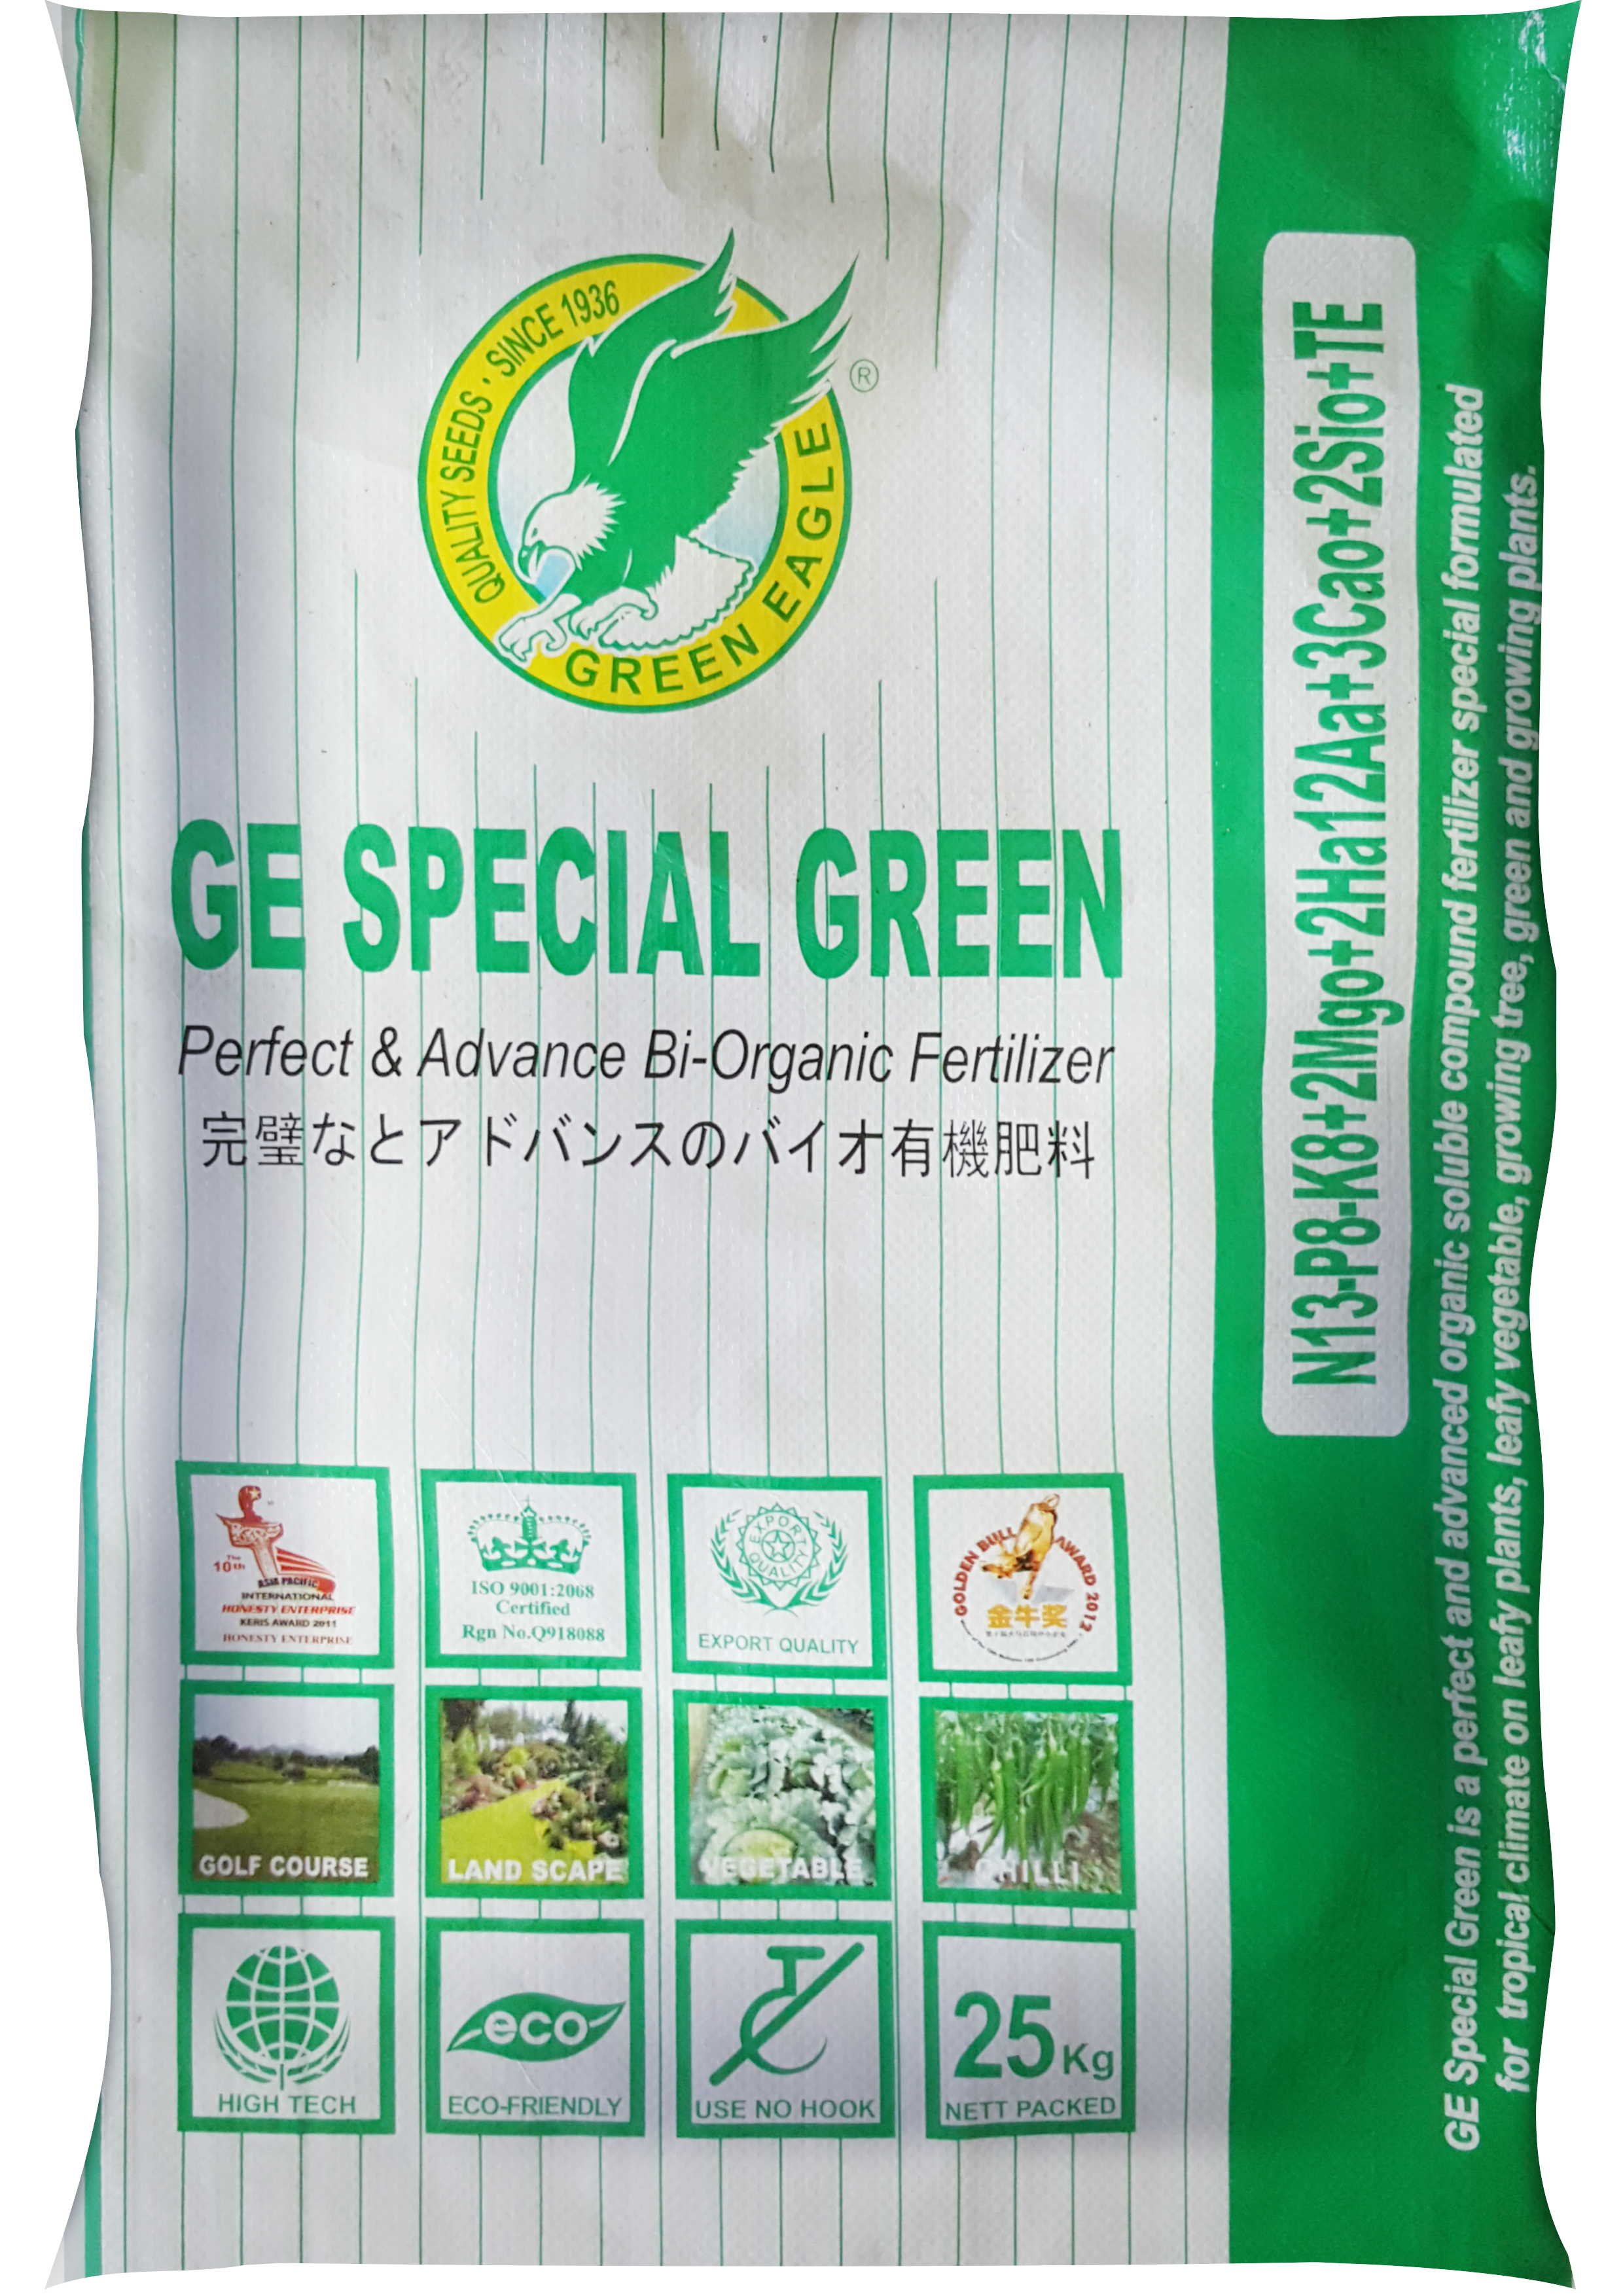 GE Special Green bag design (use this)